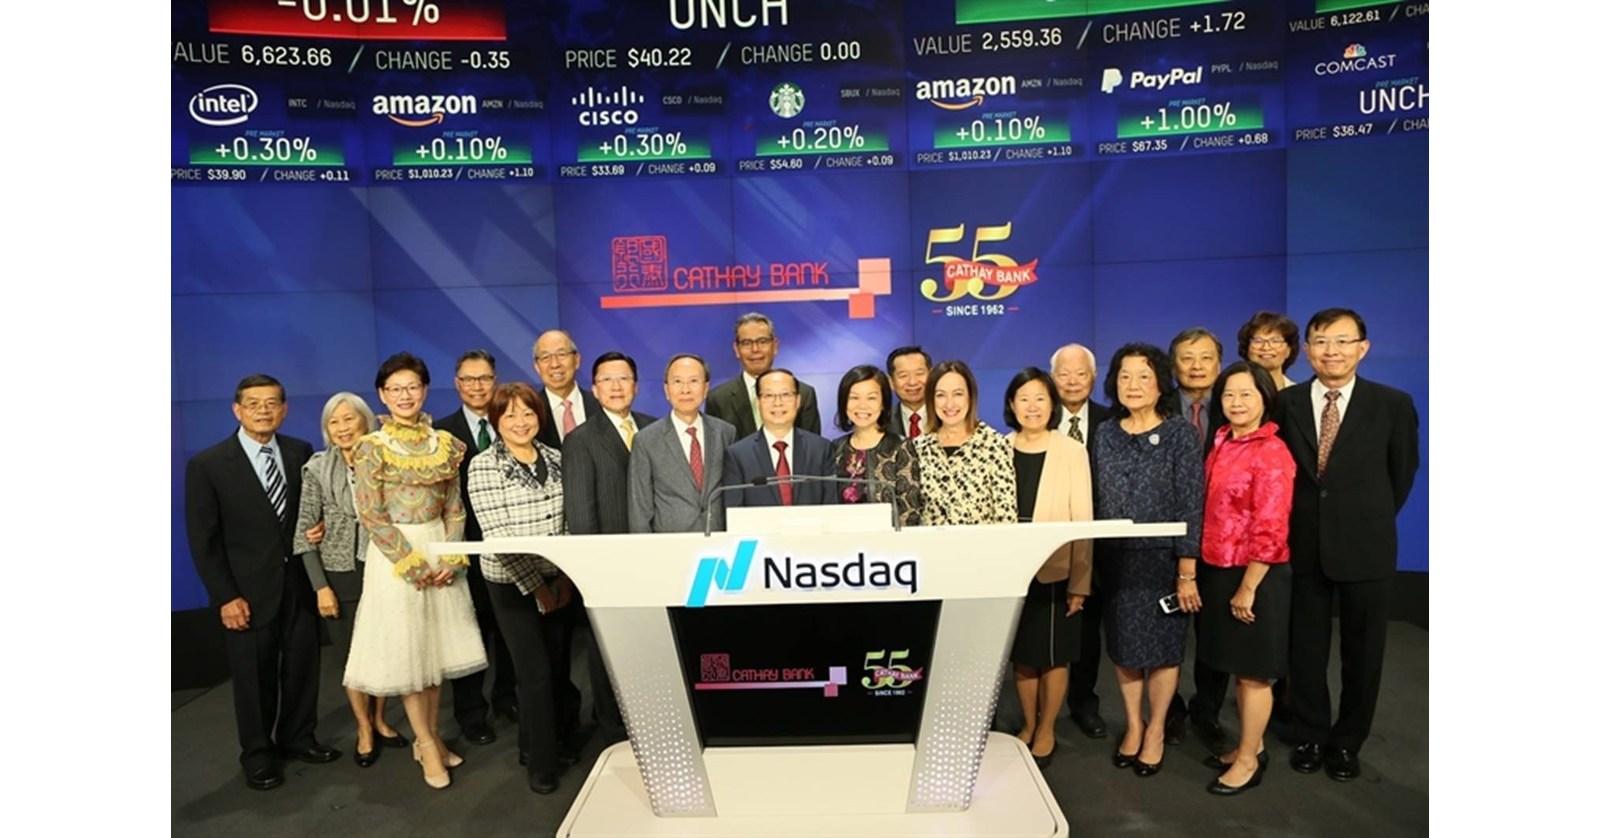 NASDAQ Opening Bell Ceremony to Celebrate Cathay Bank's 55th Anniversary